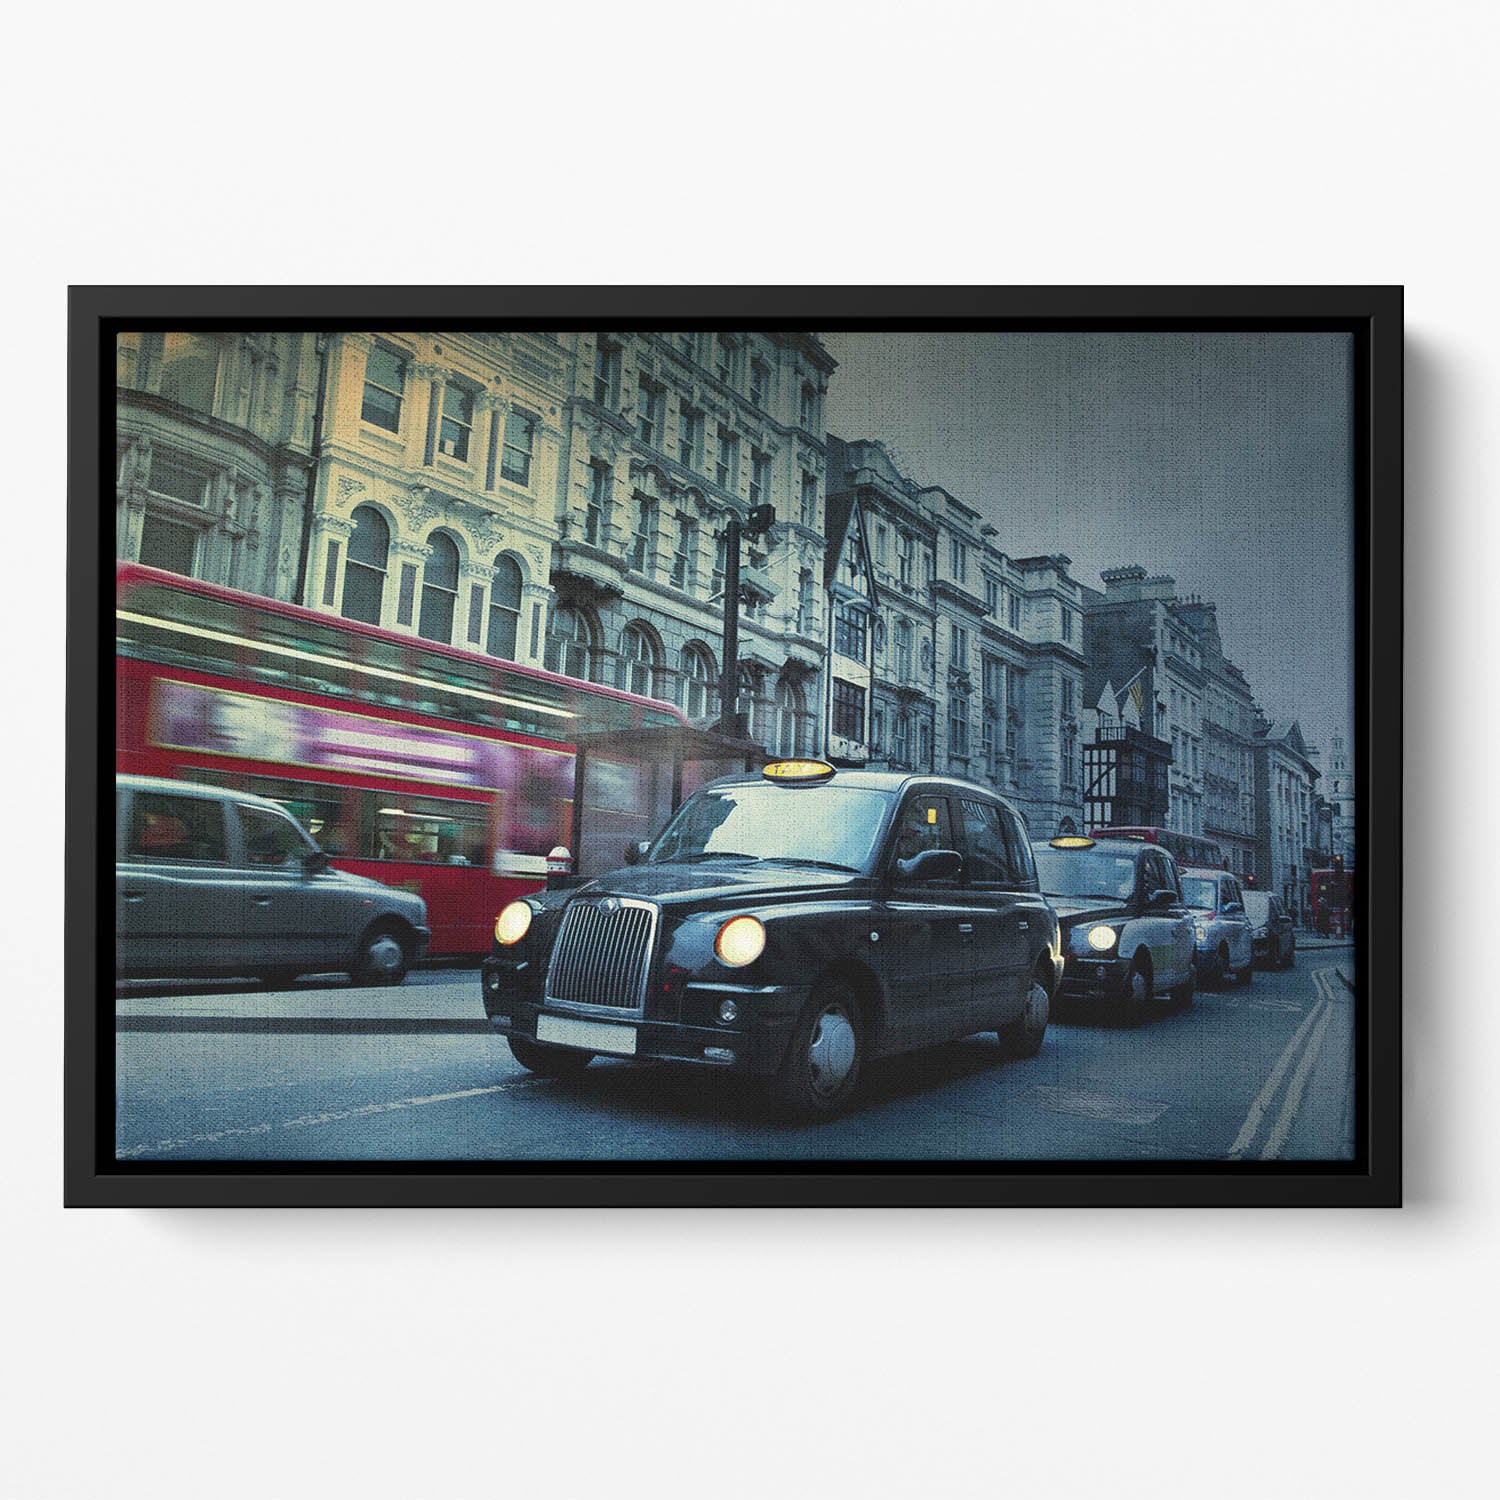 London Street Taxis Floating Framed Canvas